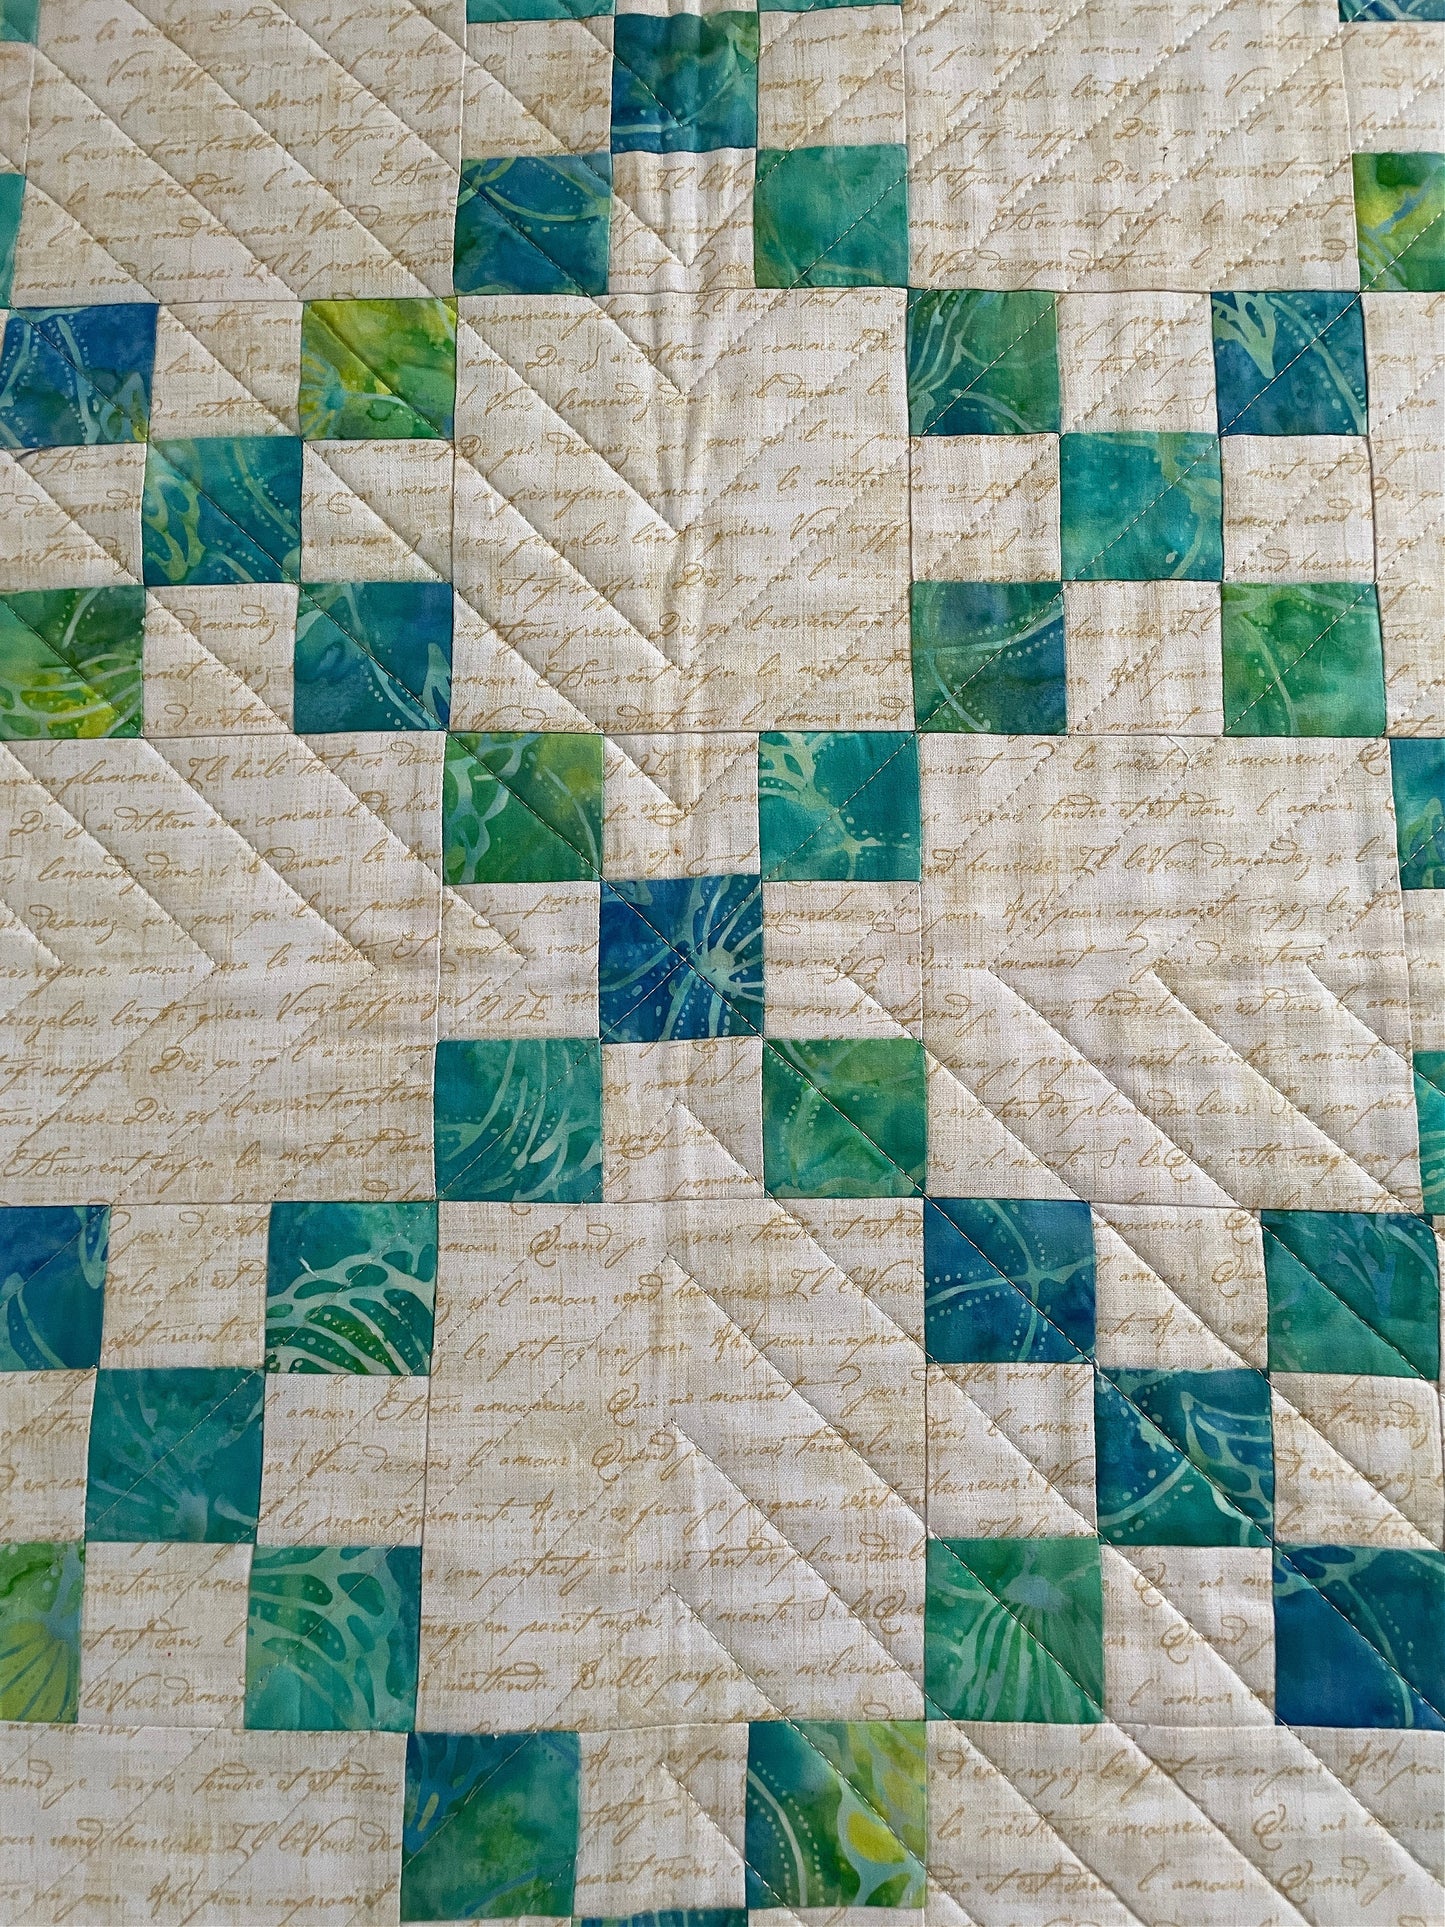 Quilted Spring Green Table Topper